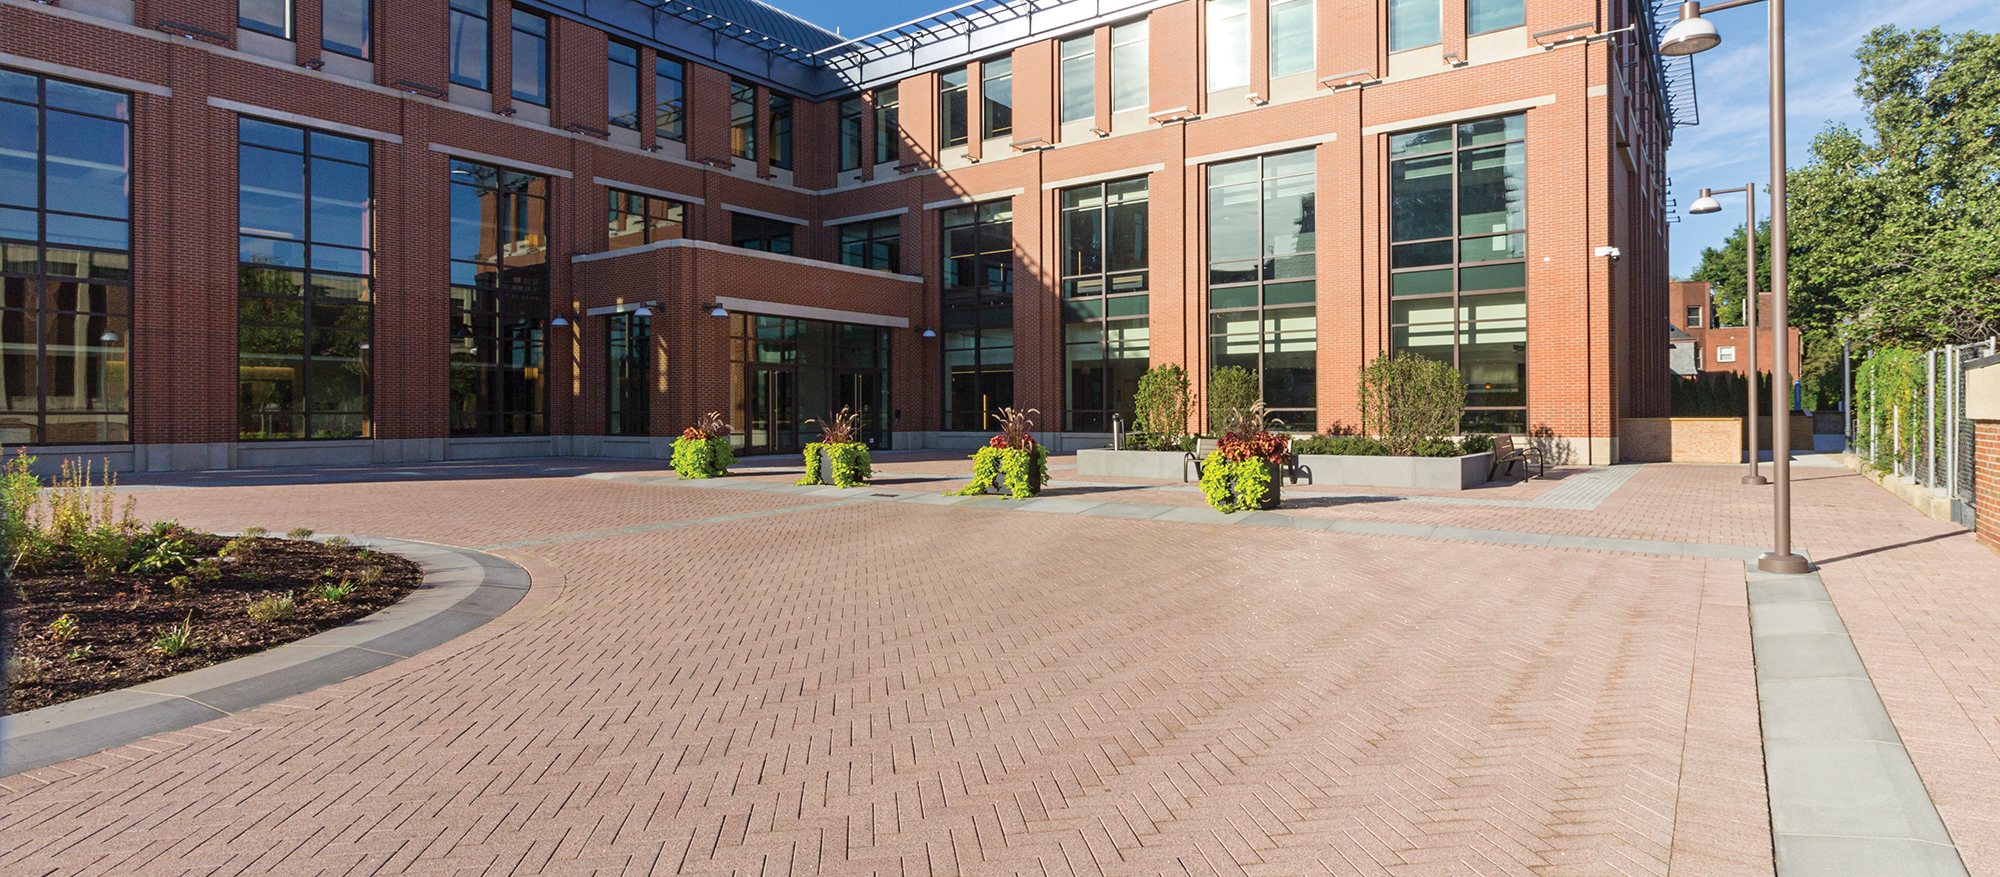 A courtyard paved with Promenade Plank in a herringbone pattern with grey accents, gardens and lighting leads to a red brick building.